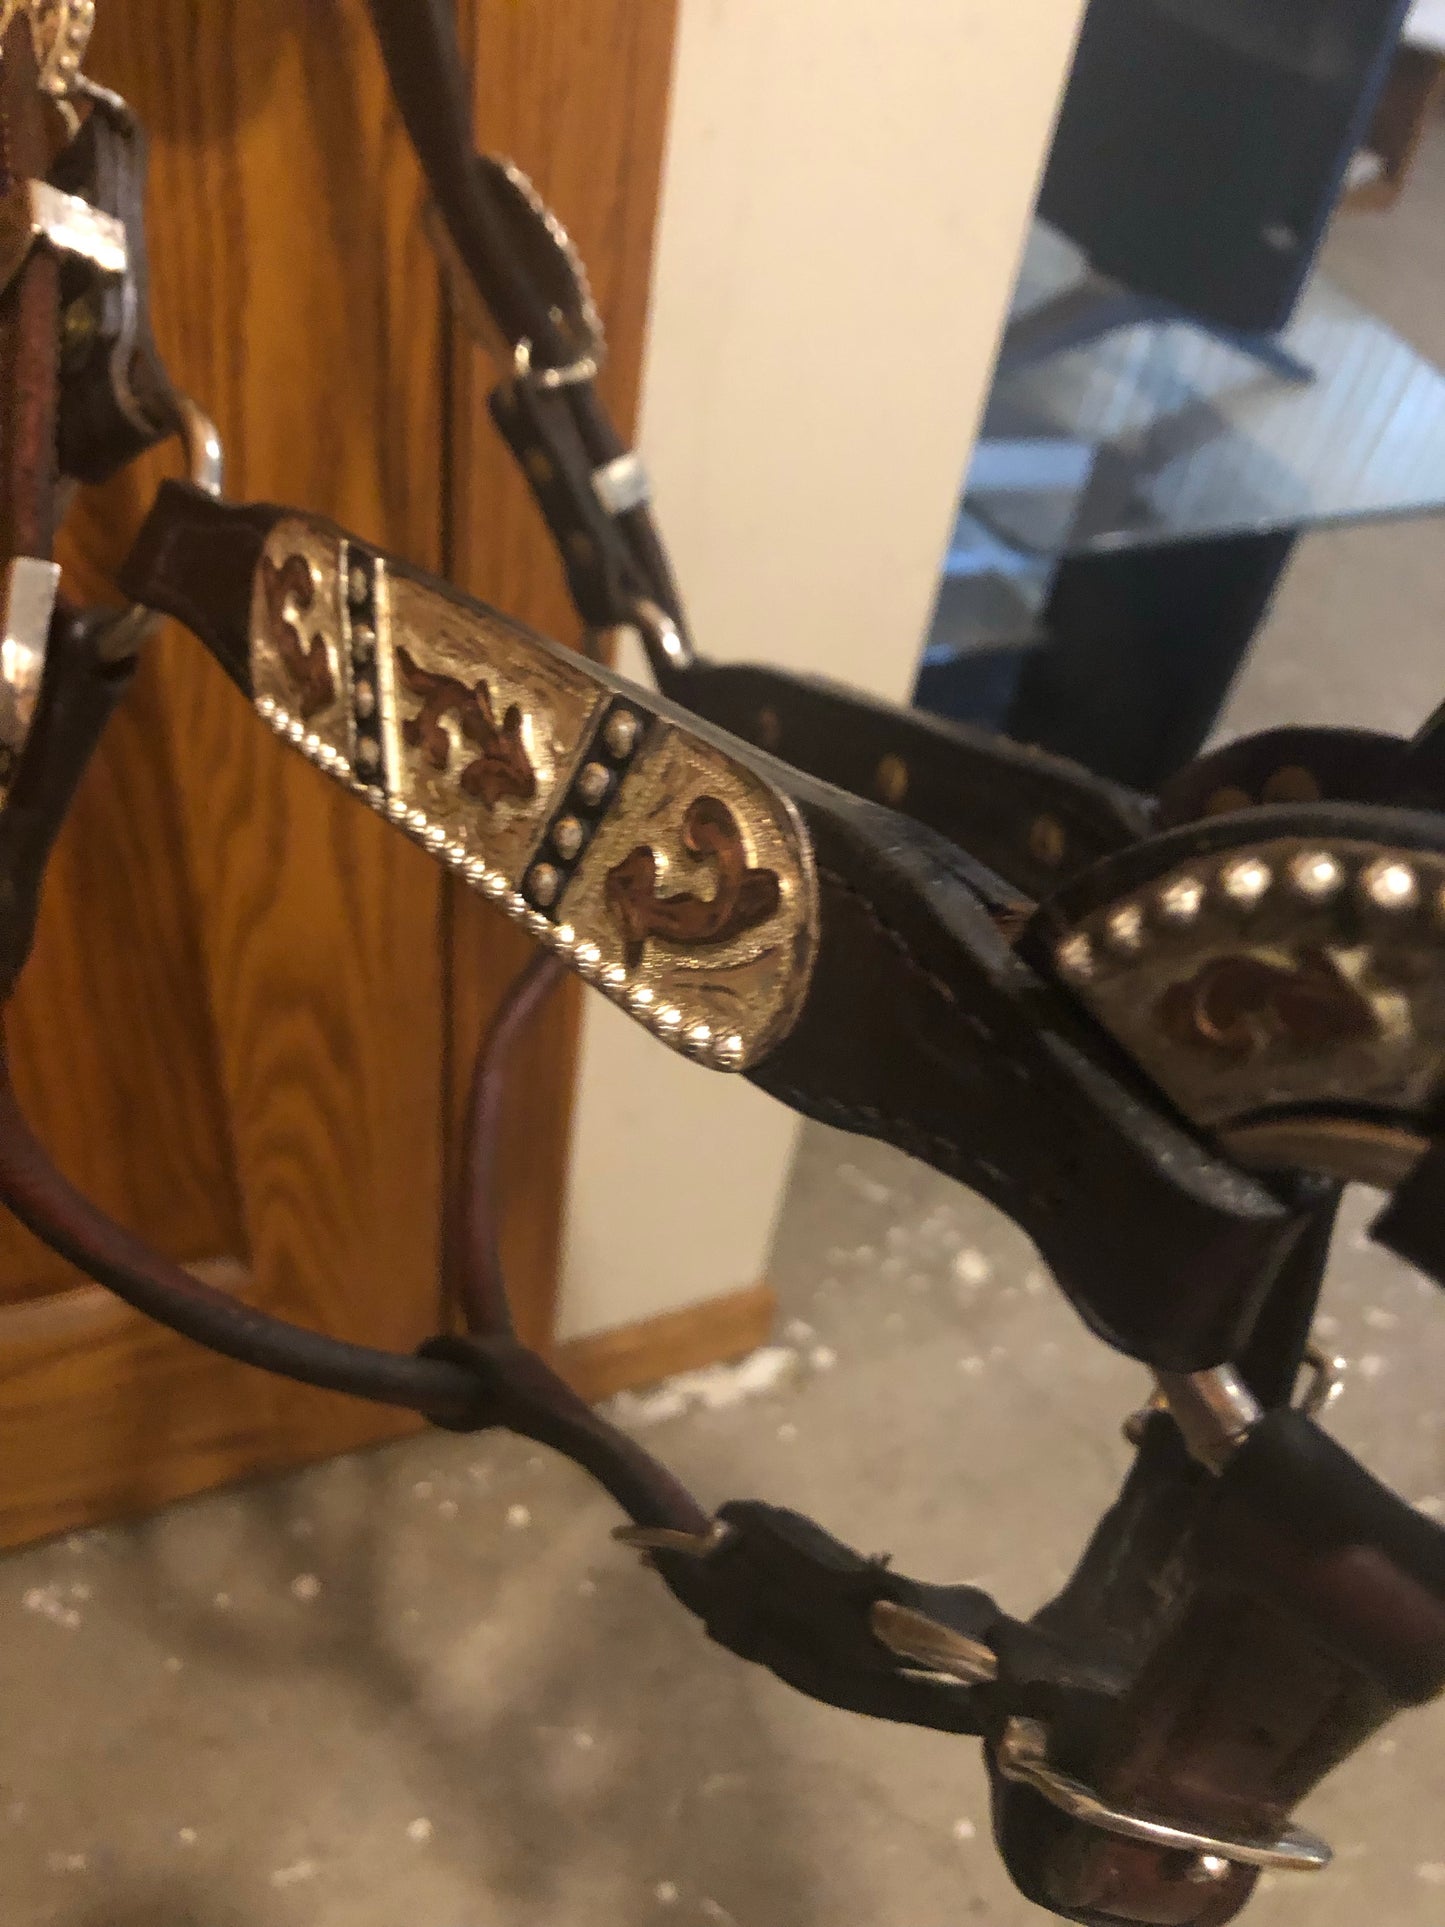 Used Dale Chavez Show Halter